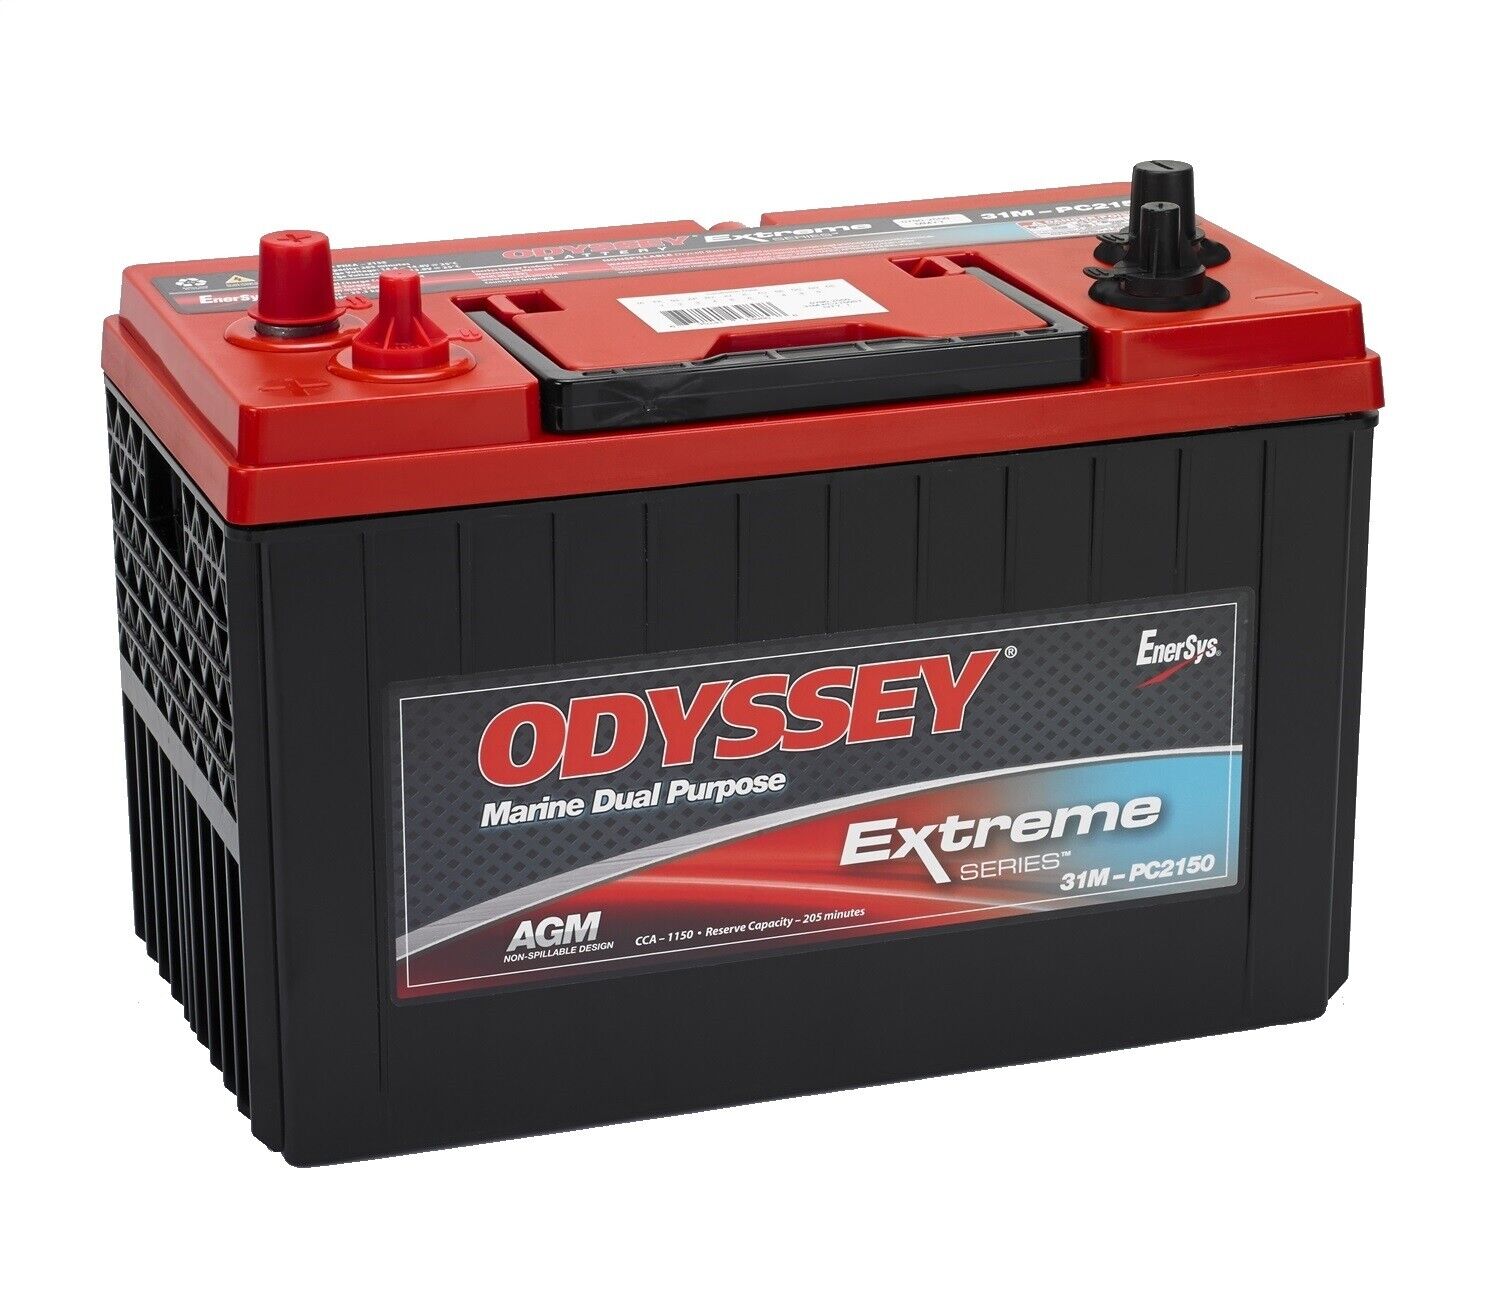 Odyssey Battery ODX-AGM31M Extreme Marine Battery Group 31M AGM